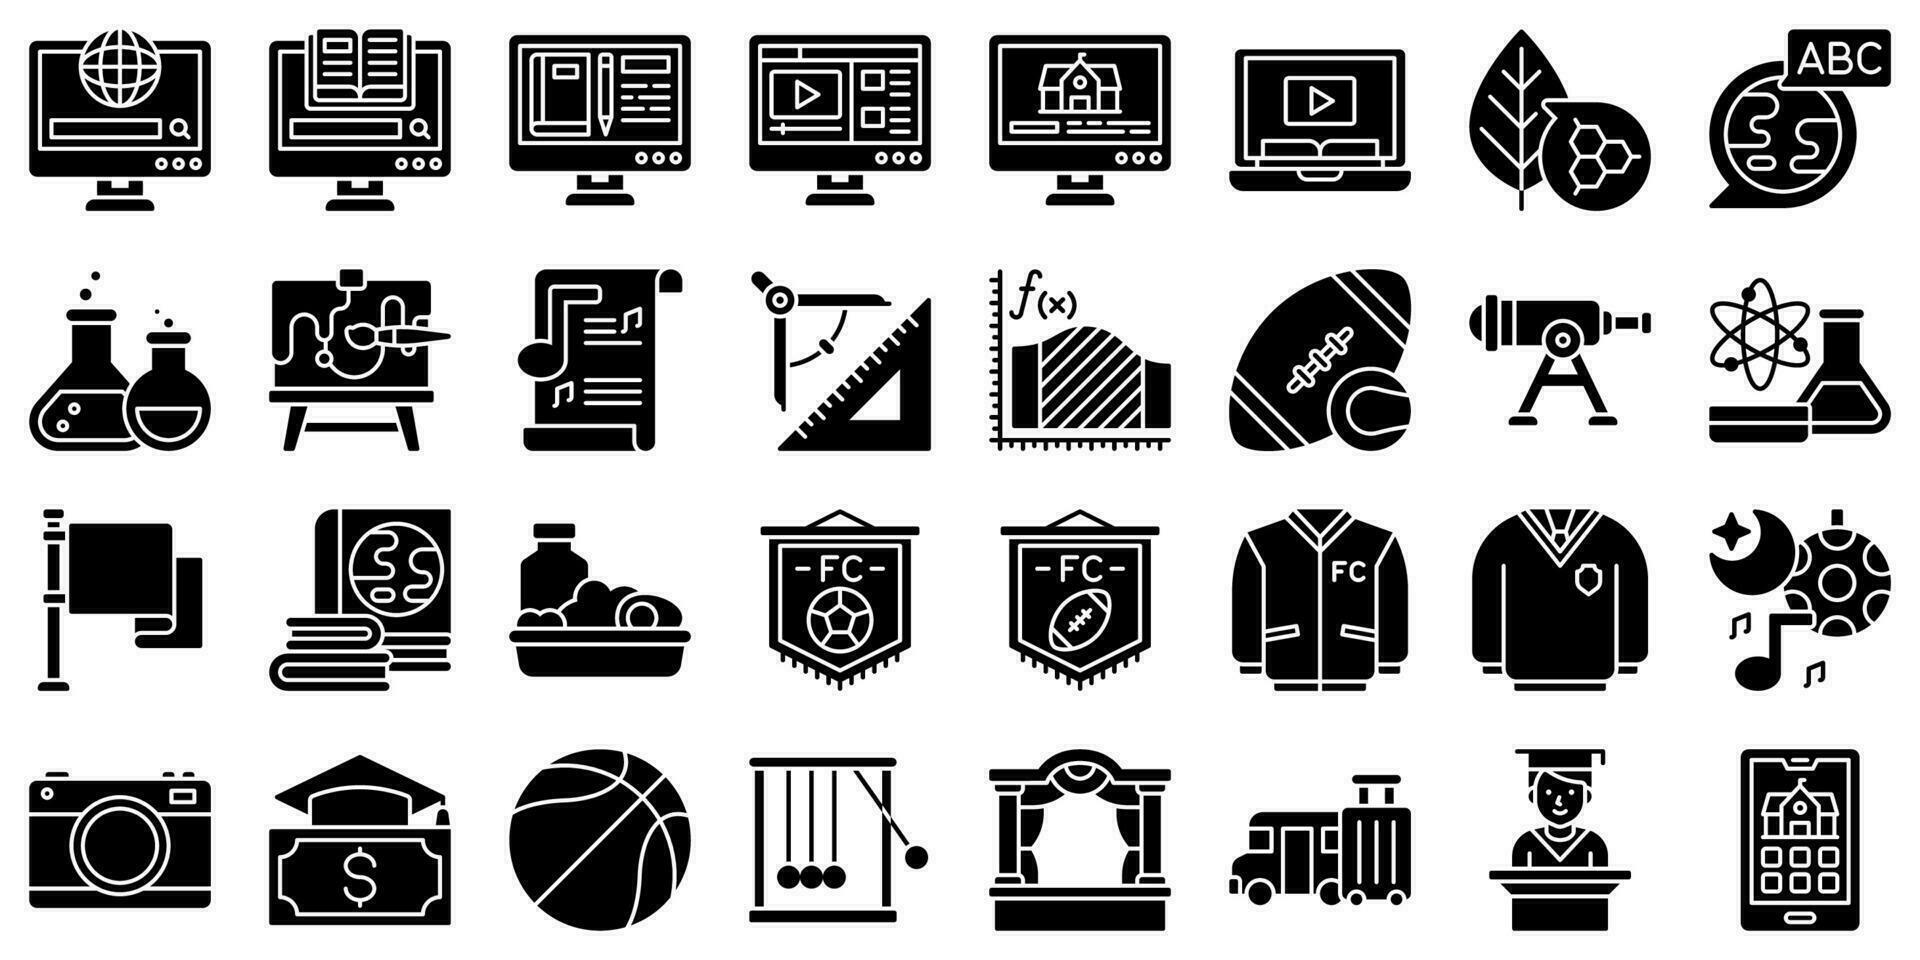 High school related solid vector icon set 2